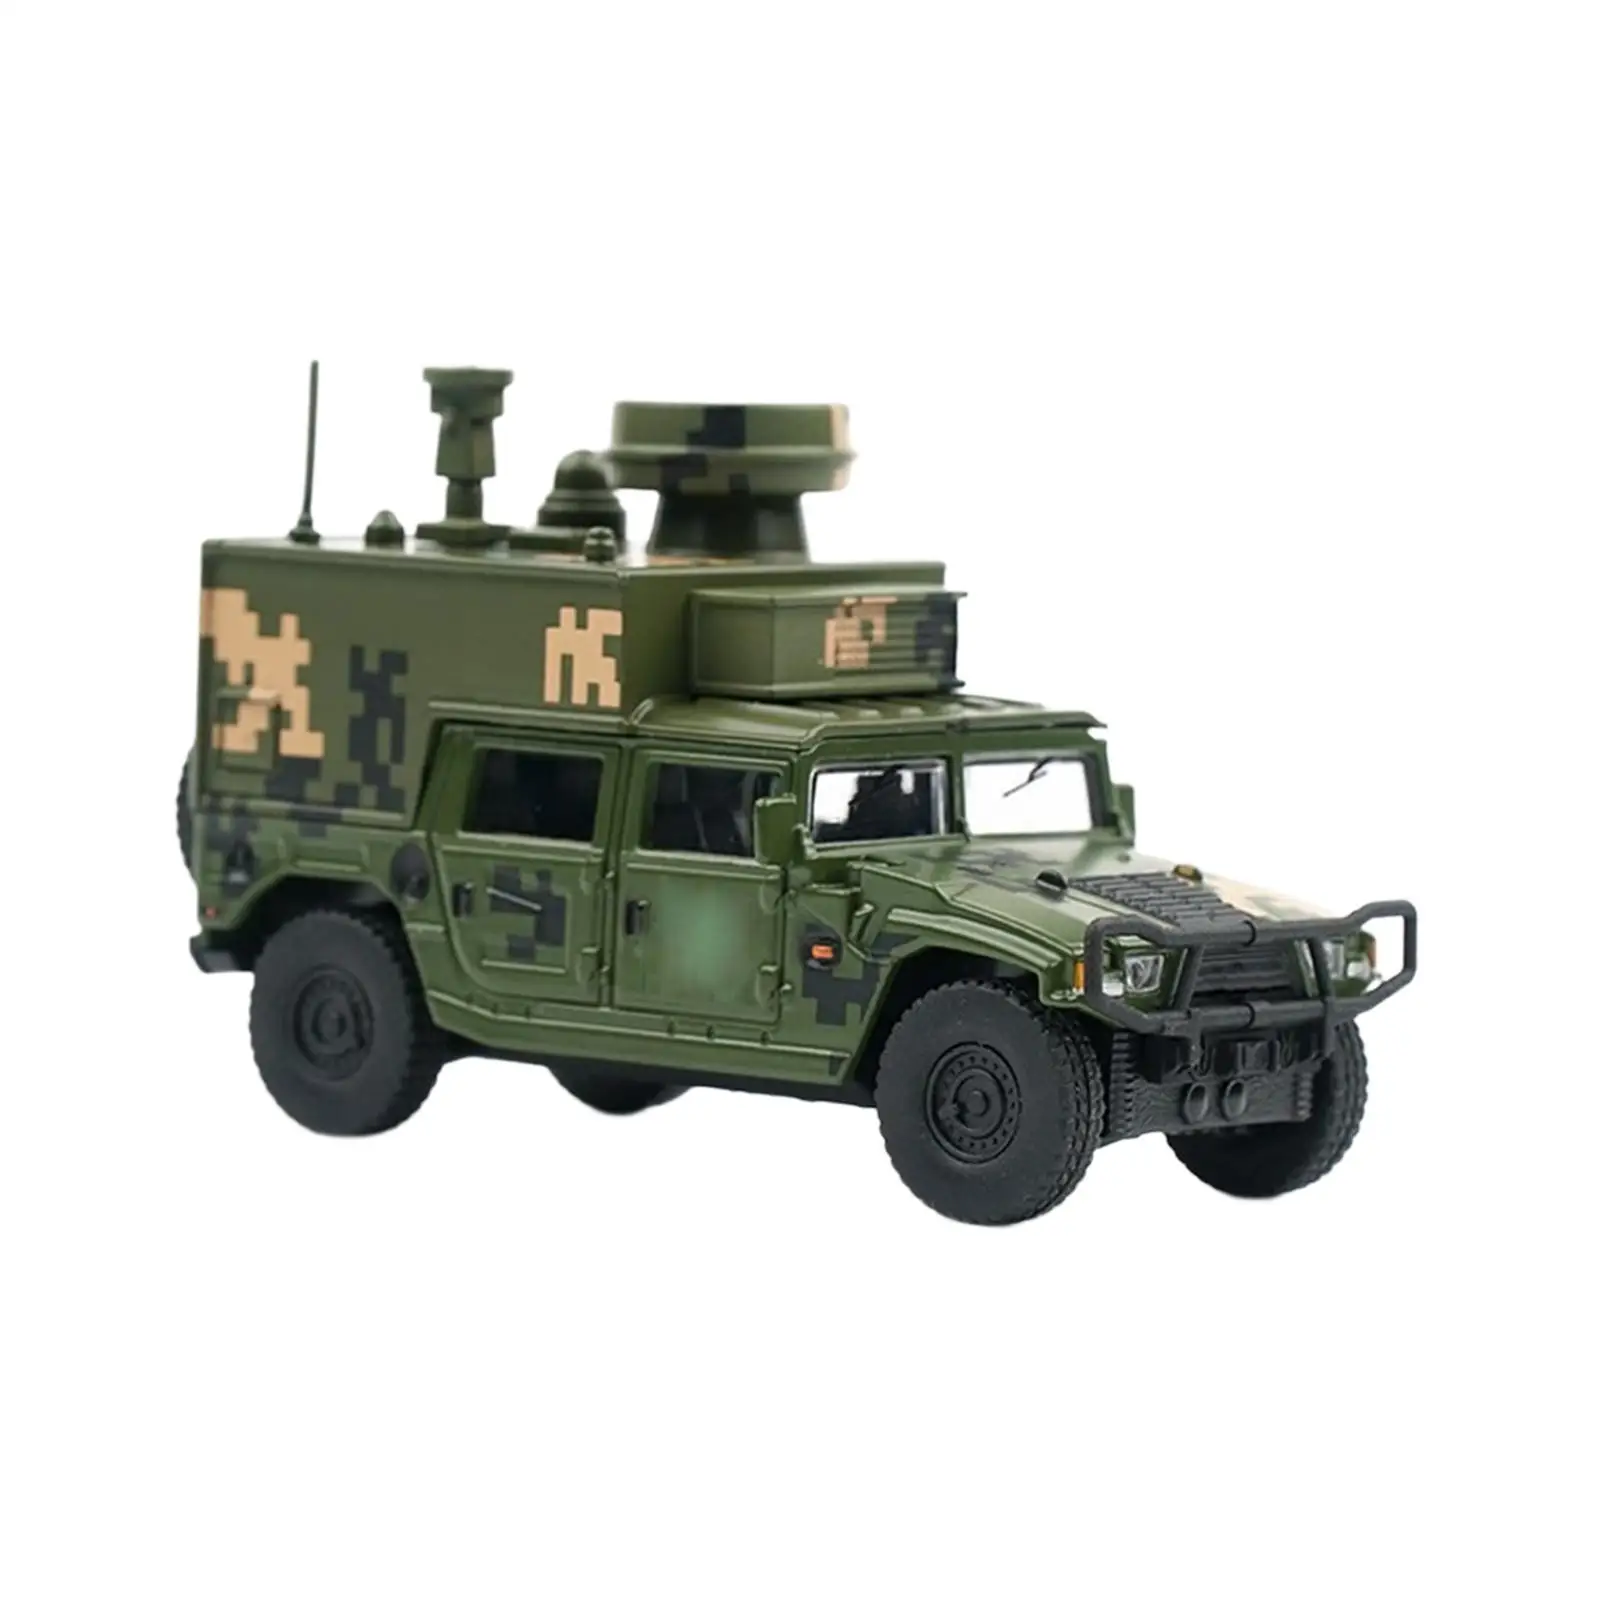 

1:64 Scale Model Car 4 Wheel Desk Decoration Collectible Diecast Model Truck for Kids Gifts Toddlers Adults Boy Girl Children